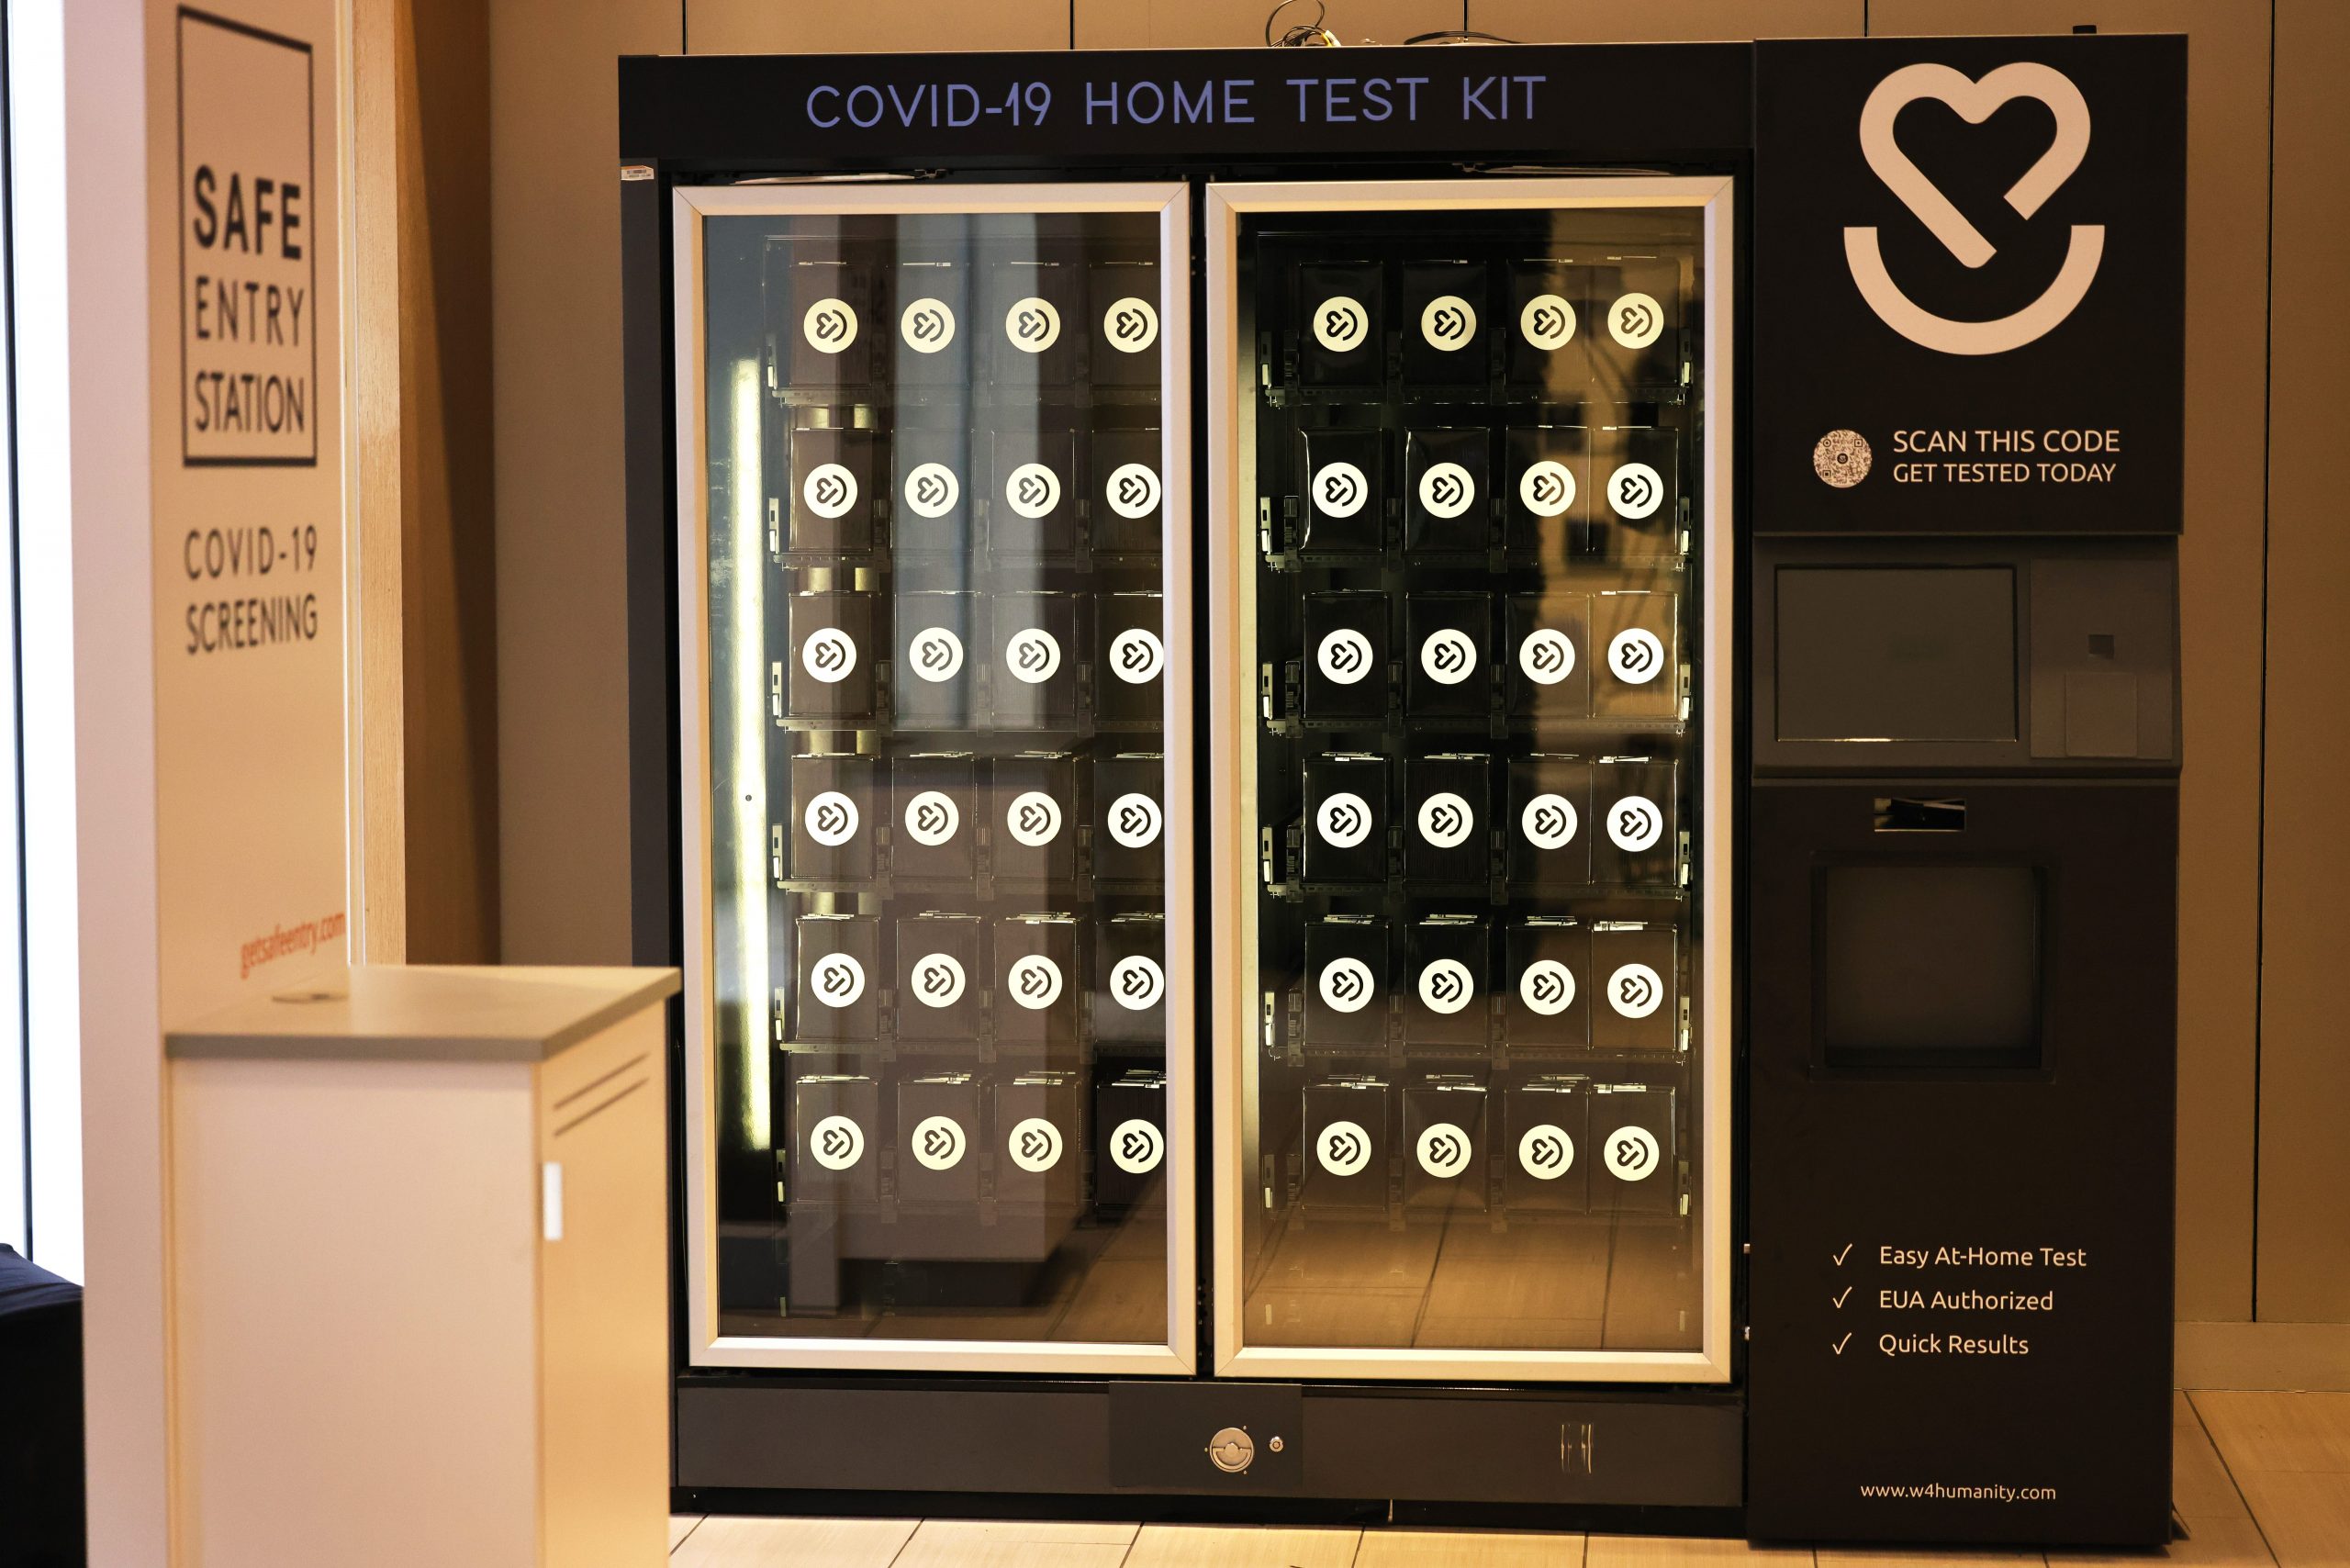 A Wellness 4 Humanity COVID-19 at-home test kit vending machine is seen on January 27, 2021 in New York City. Wellness 4 Humanity, a group of science- and medical-focused social entrepreneurs, introduced the first vending machines for coronavirus (COVID-19) at-home test kits in New York City. The kits will soon be available throughout NYC as well as other major cities in the country.